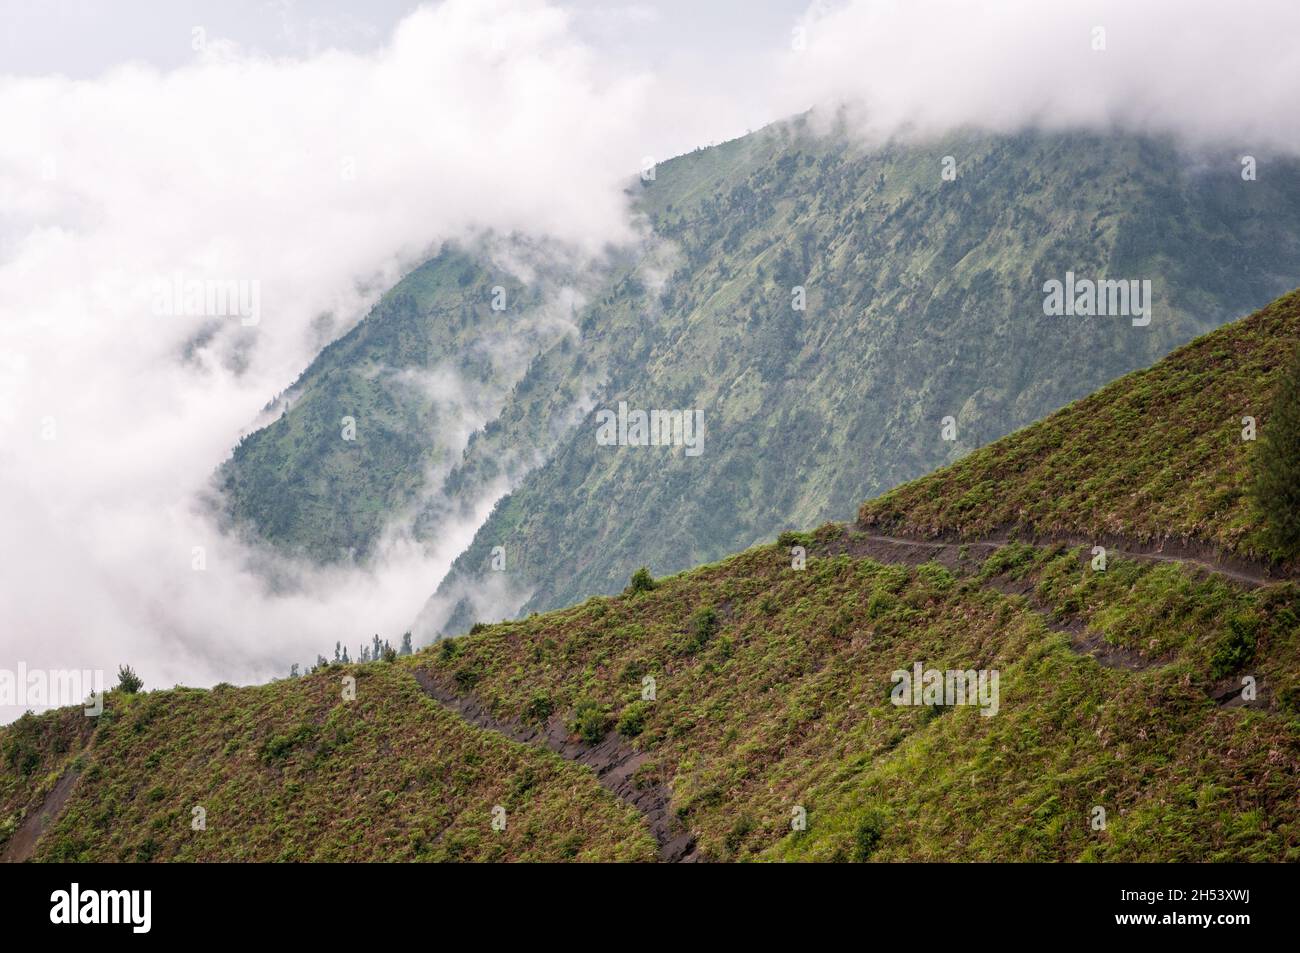 Mist and mountain near Cemoro Lawang, East Java, Indonesia Stock Photo